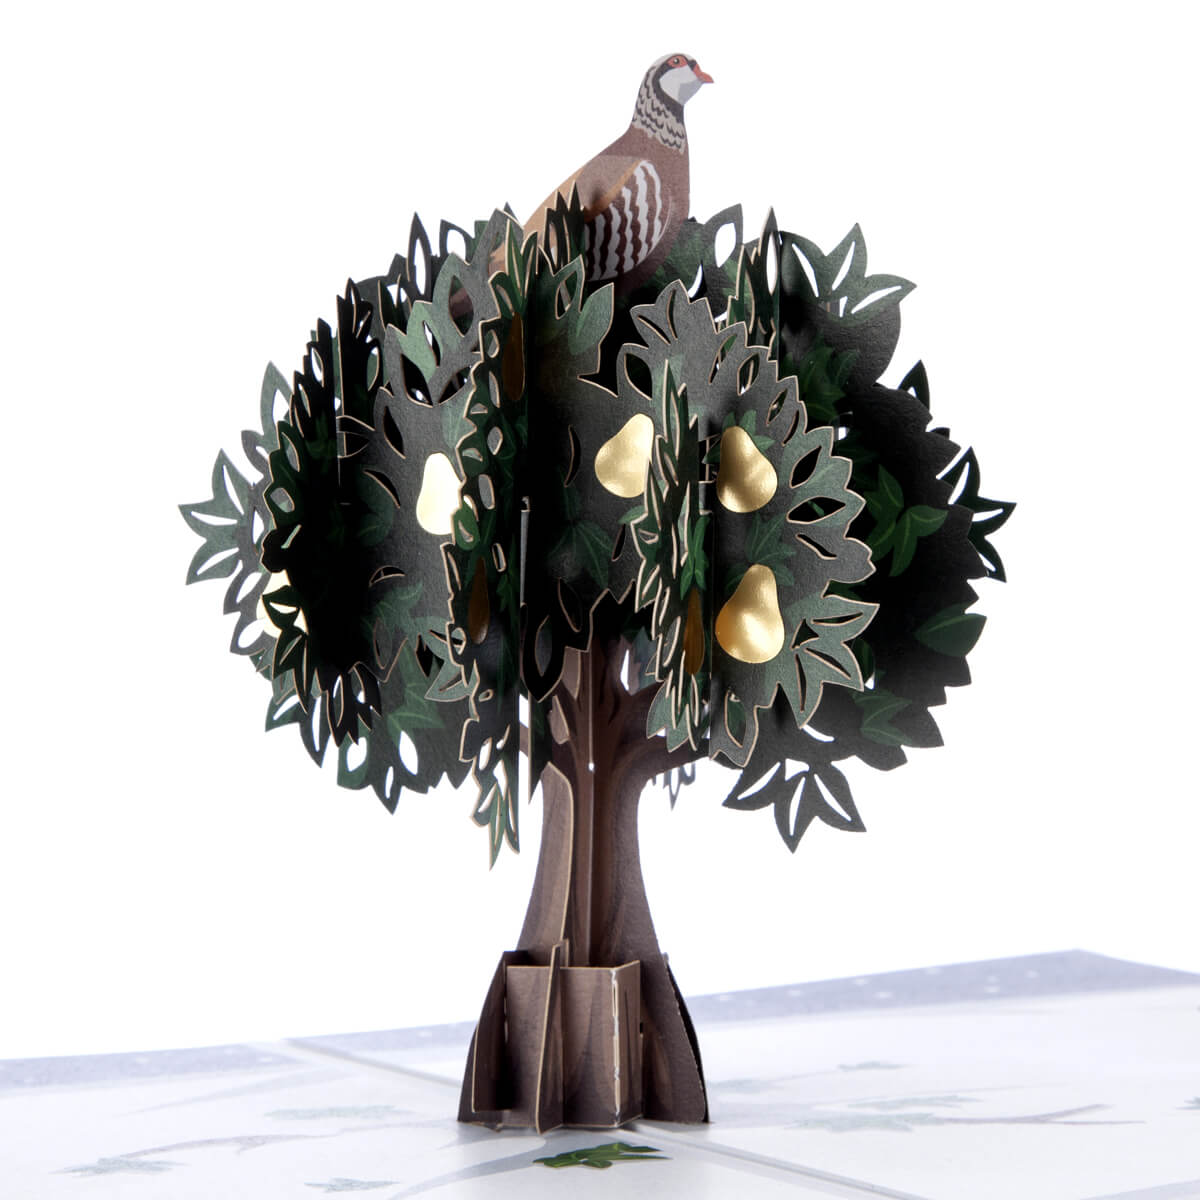 Partridge In A Pear Tree Pop Up Card For Christmas. Close Up Image